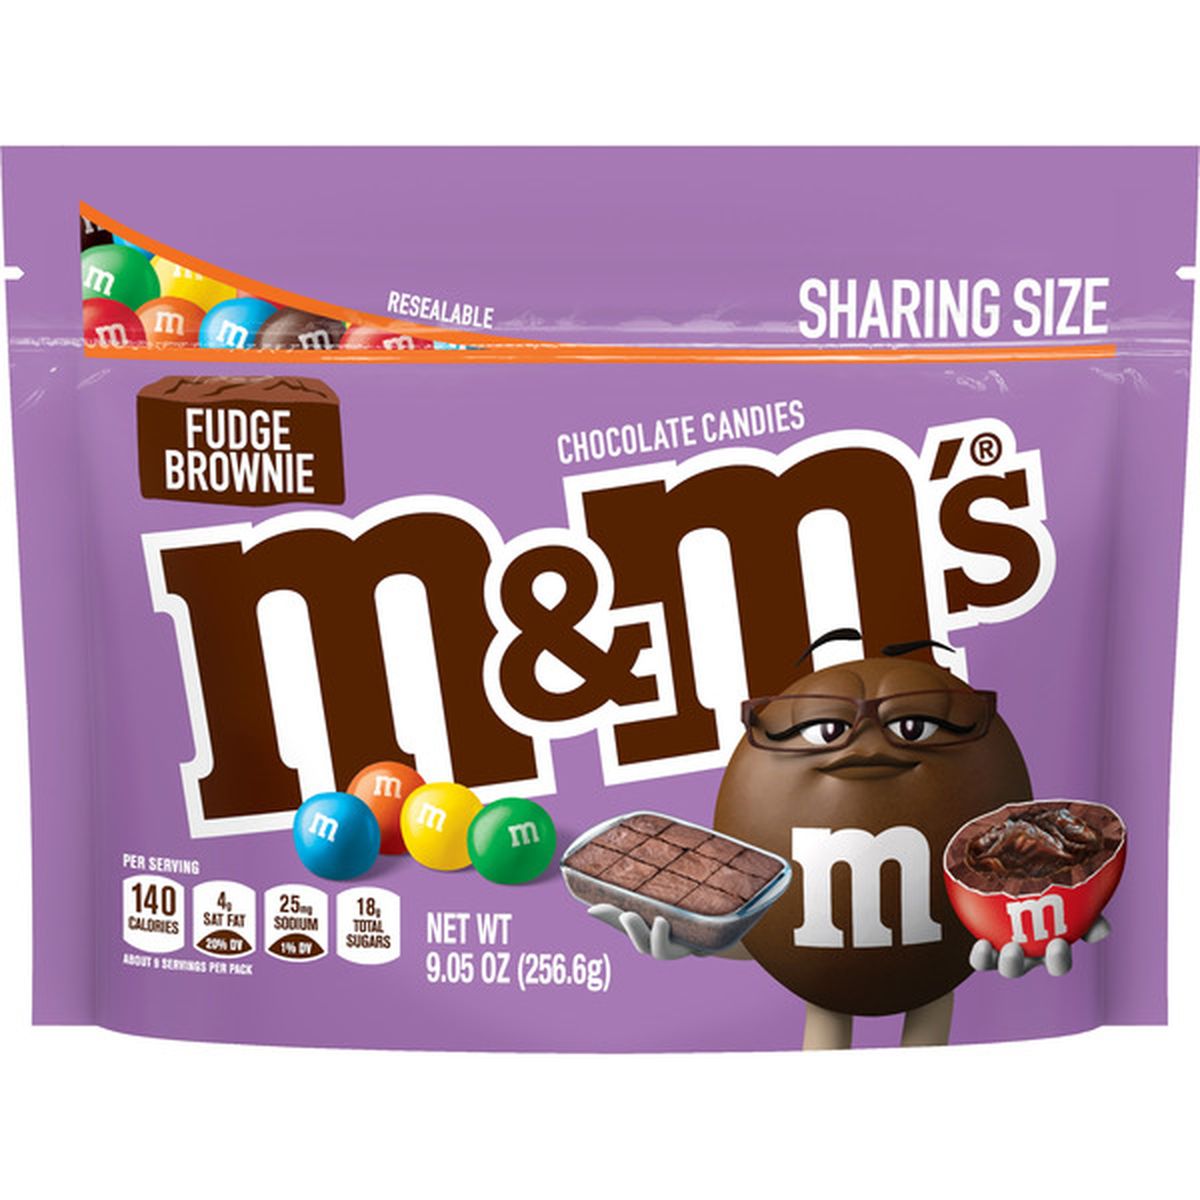 Calories in M&M's Chocolate Candies, Fudge Brownie, Sharing Size